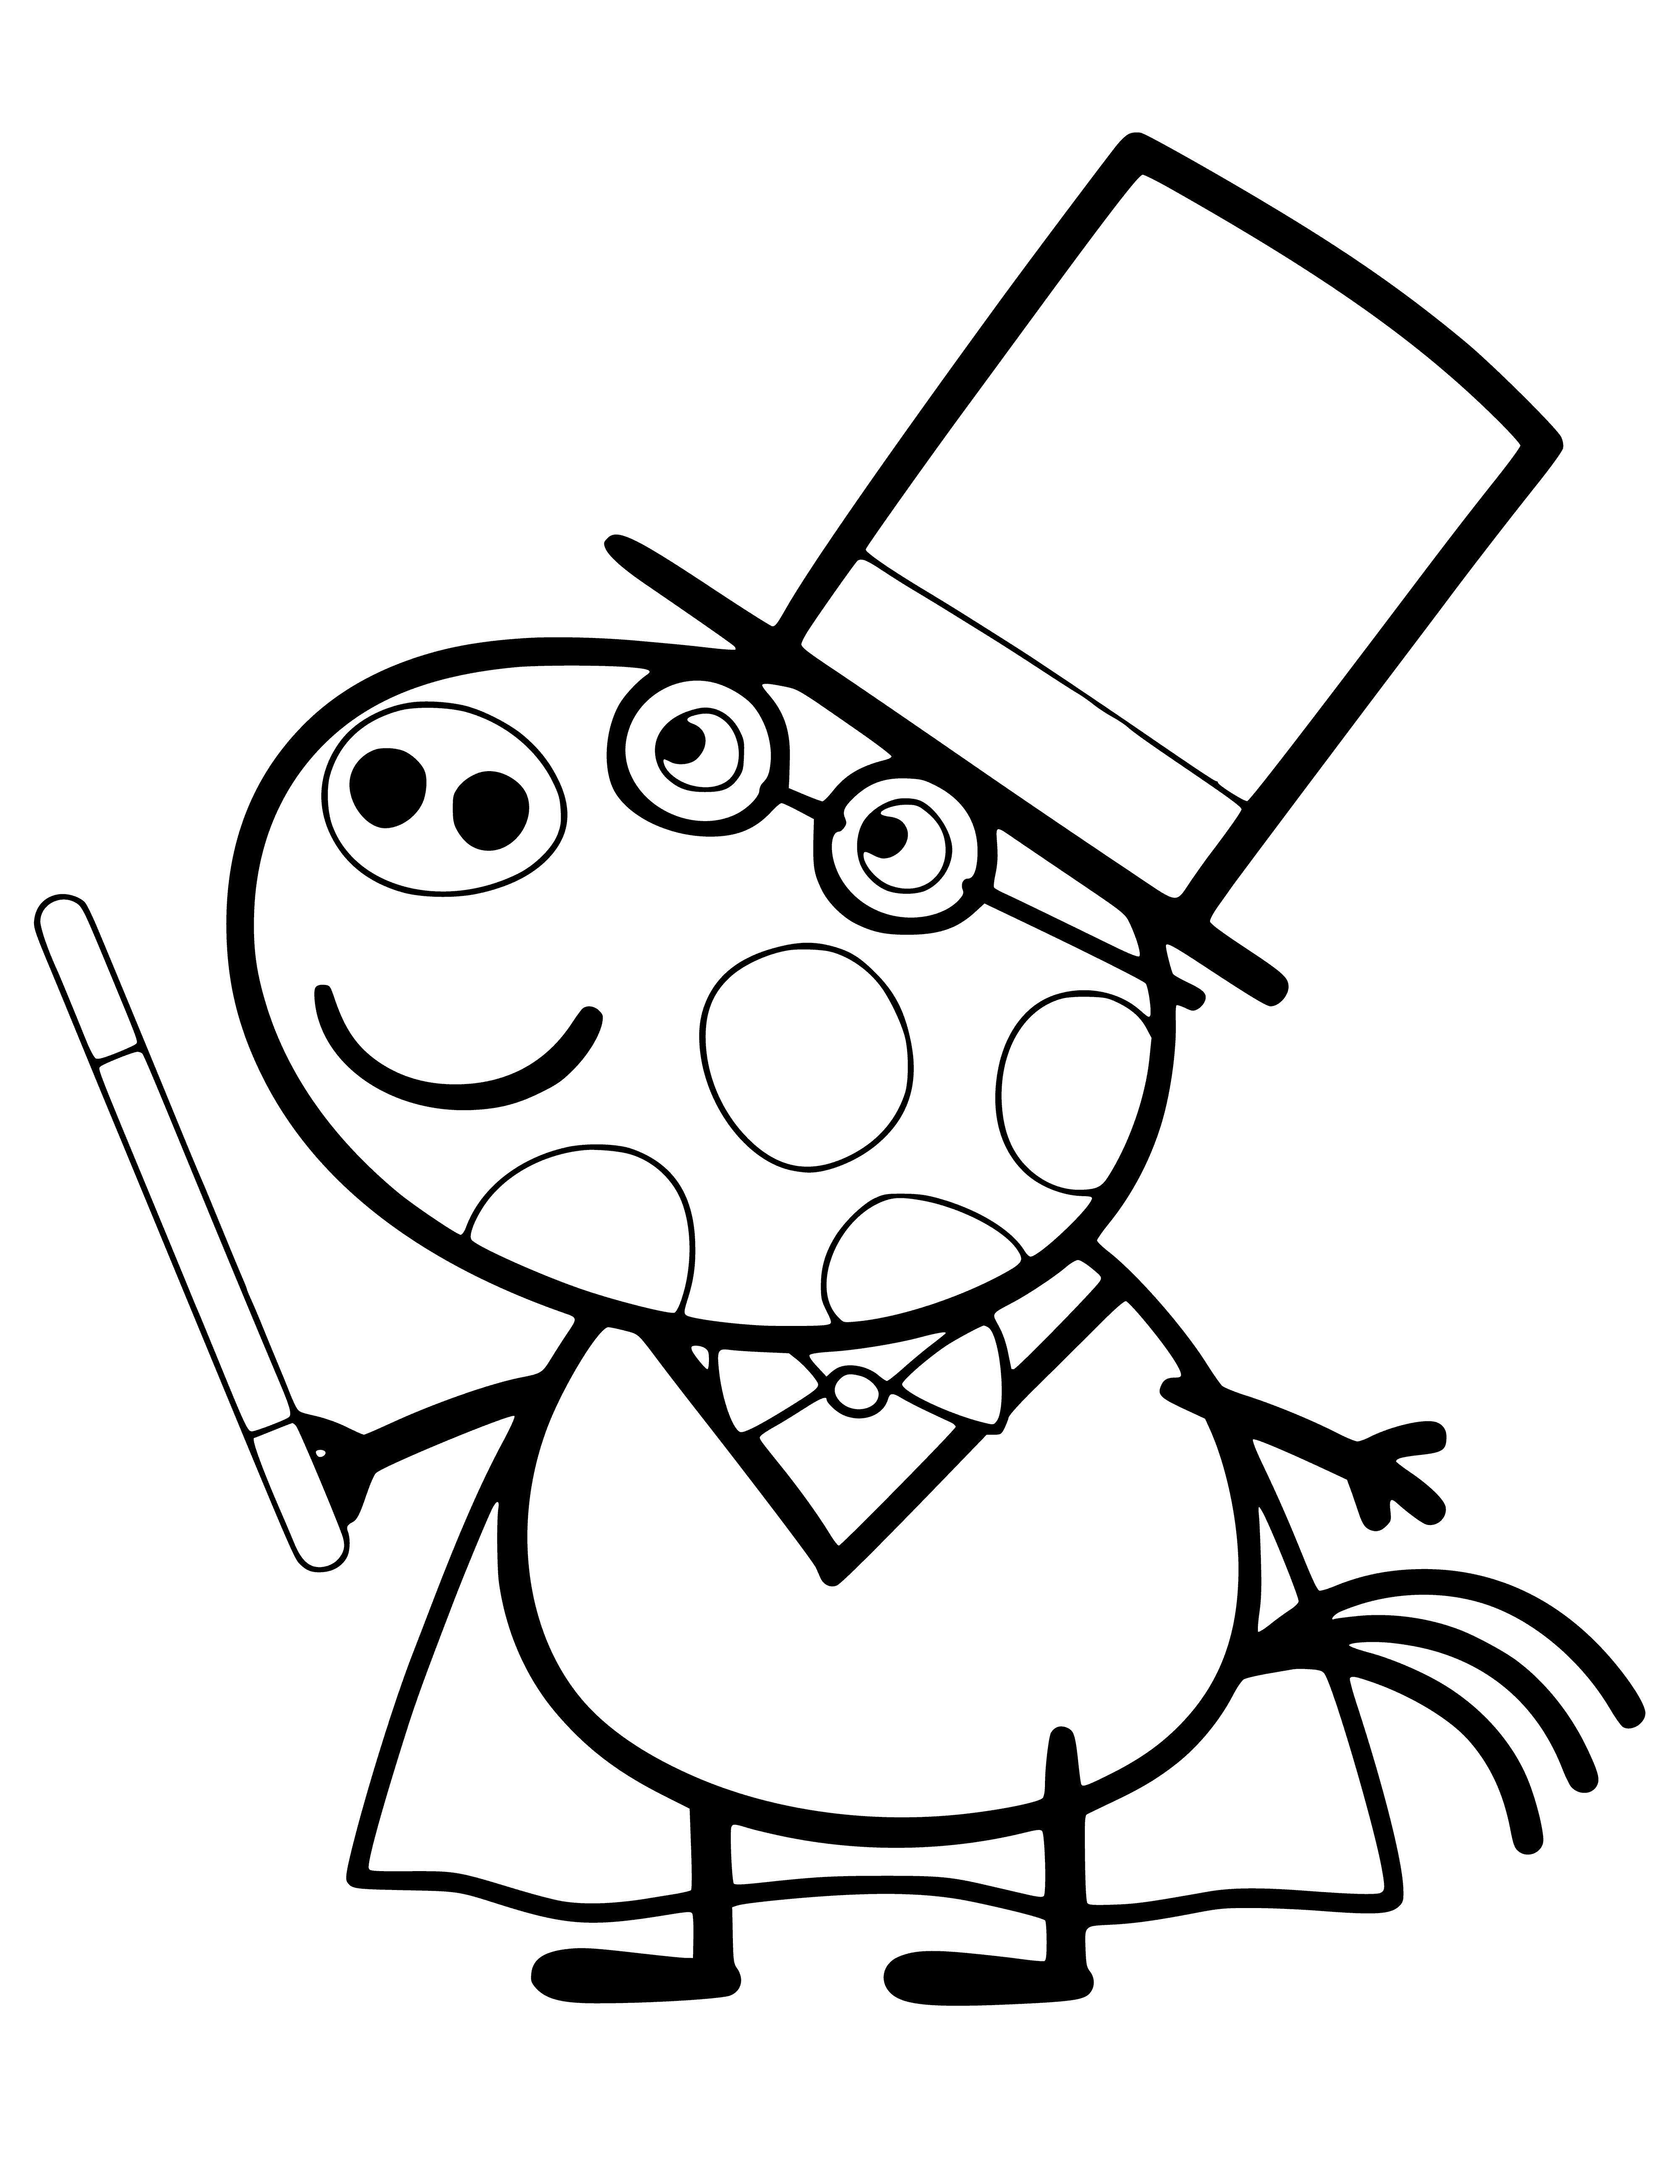 coloring page: Pig in wizard costume amazes children with magic and enthusiasm.